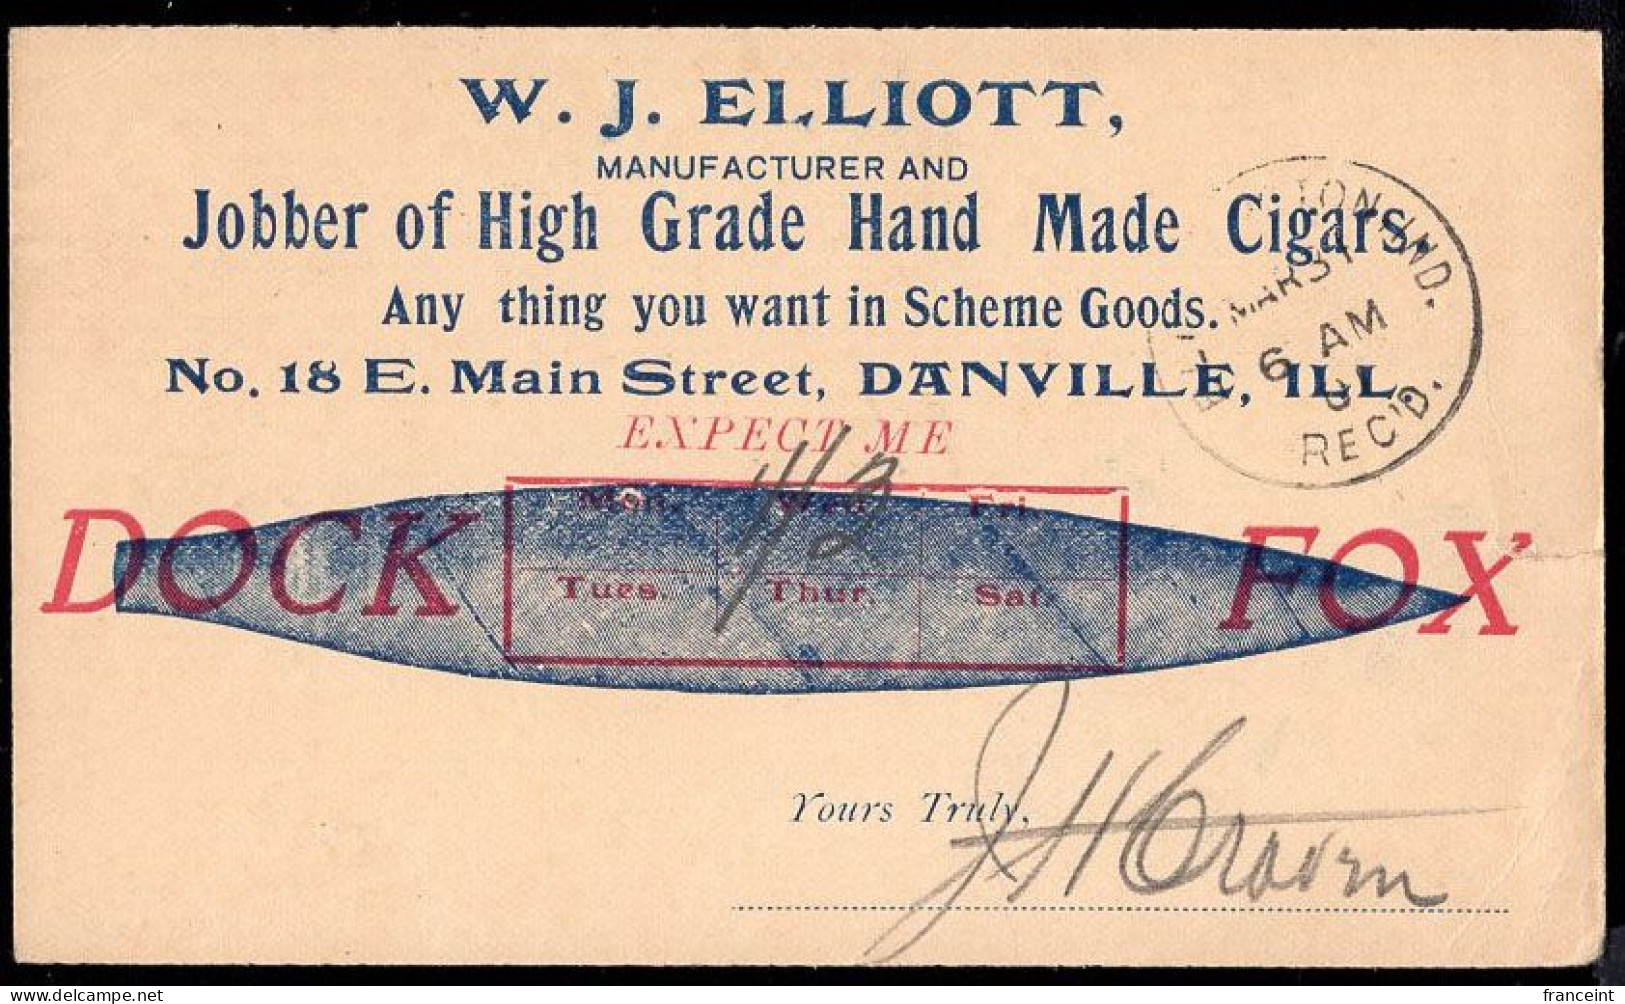 U.S.A.(1901) Hand-made Cigar. One Cent Postal Card With Illustrated Ad For W.J. Elliott High Grade Hand Made Cigars. - 1901-20